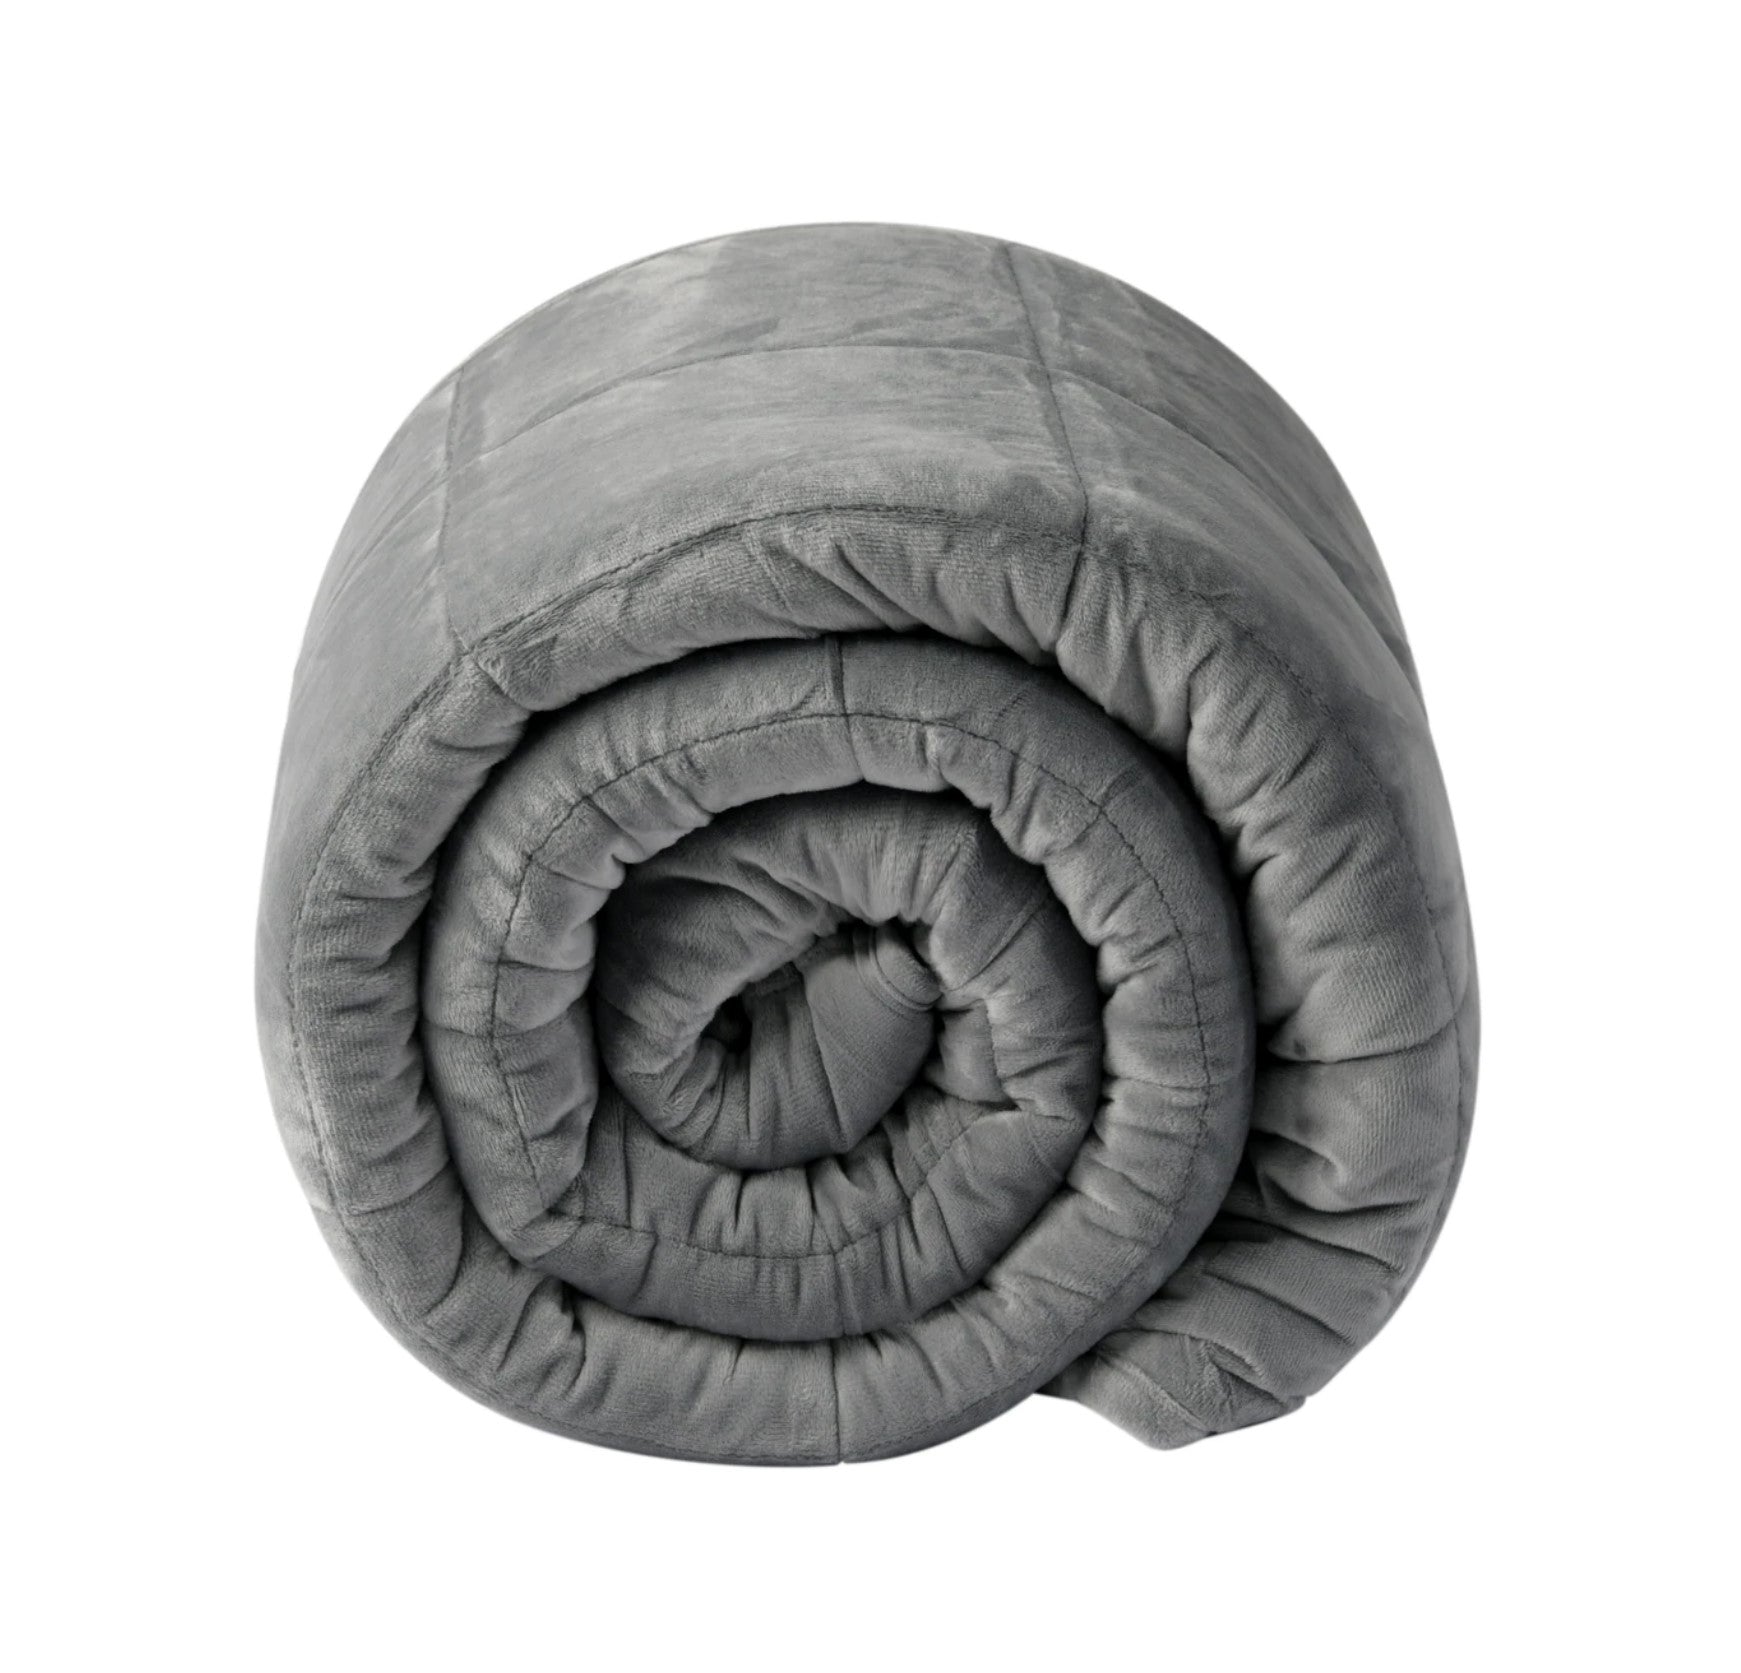 Calming Soft Weighted Blanket - Grey